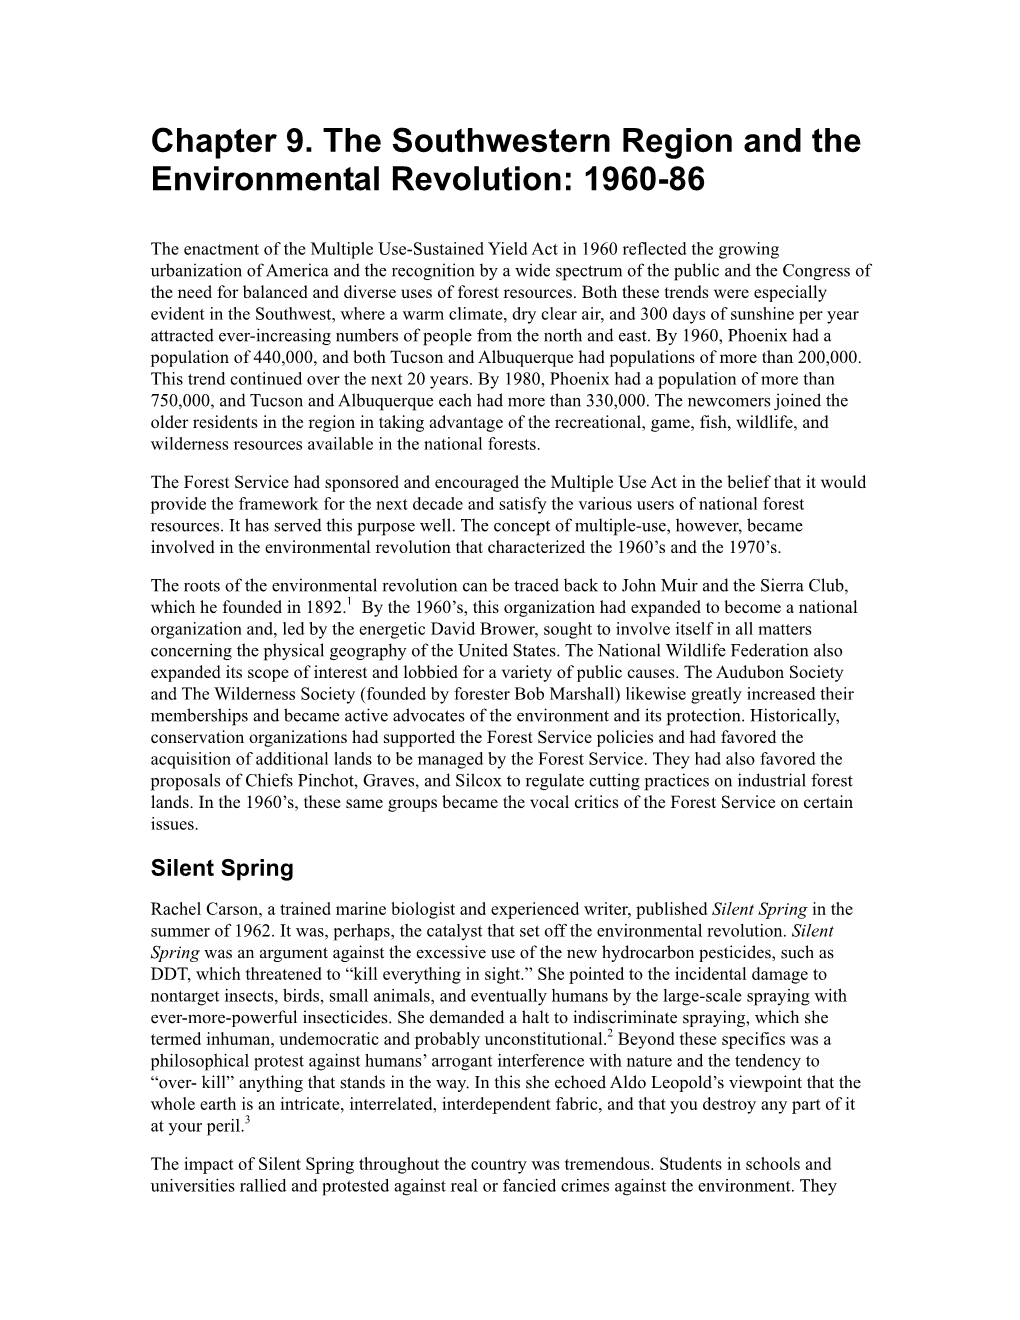 Chapter 9. the Southwestern Region and the Environmental Revolution: 1960-86